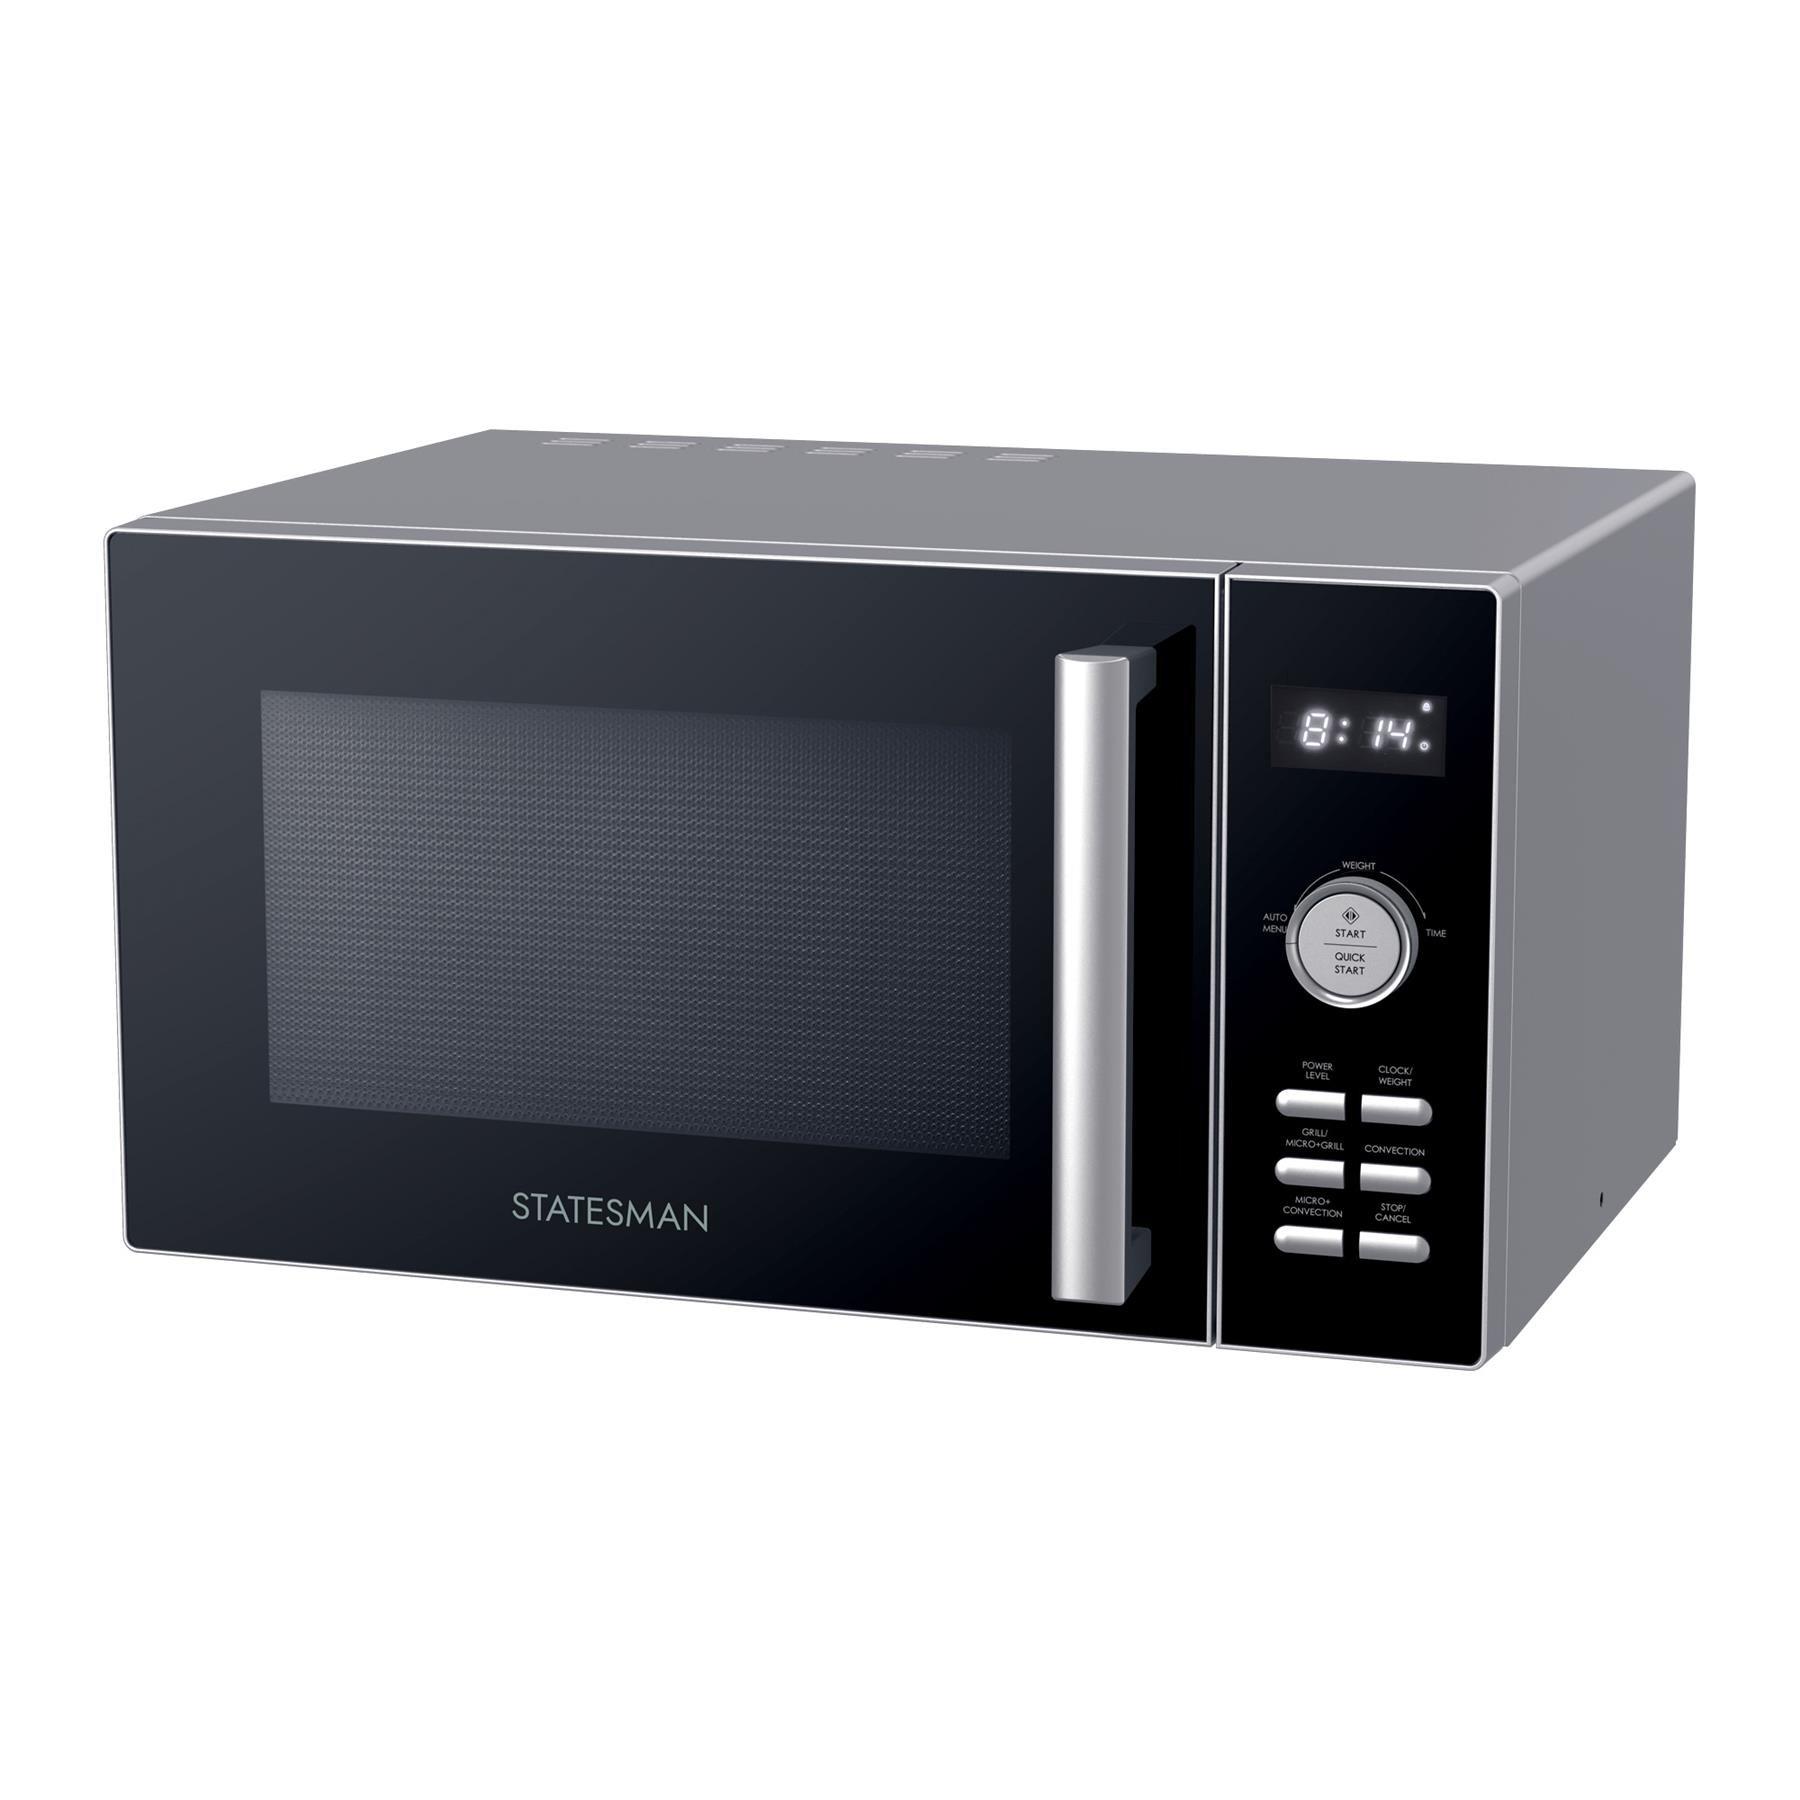 Digital Combination Microwave with Grill and Convection, 900 W, 30 Litre